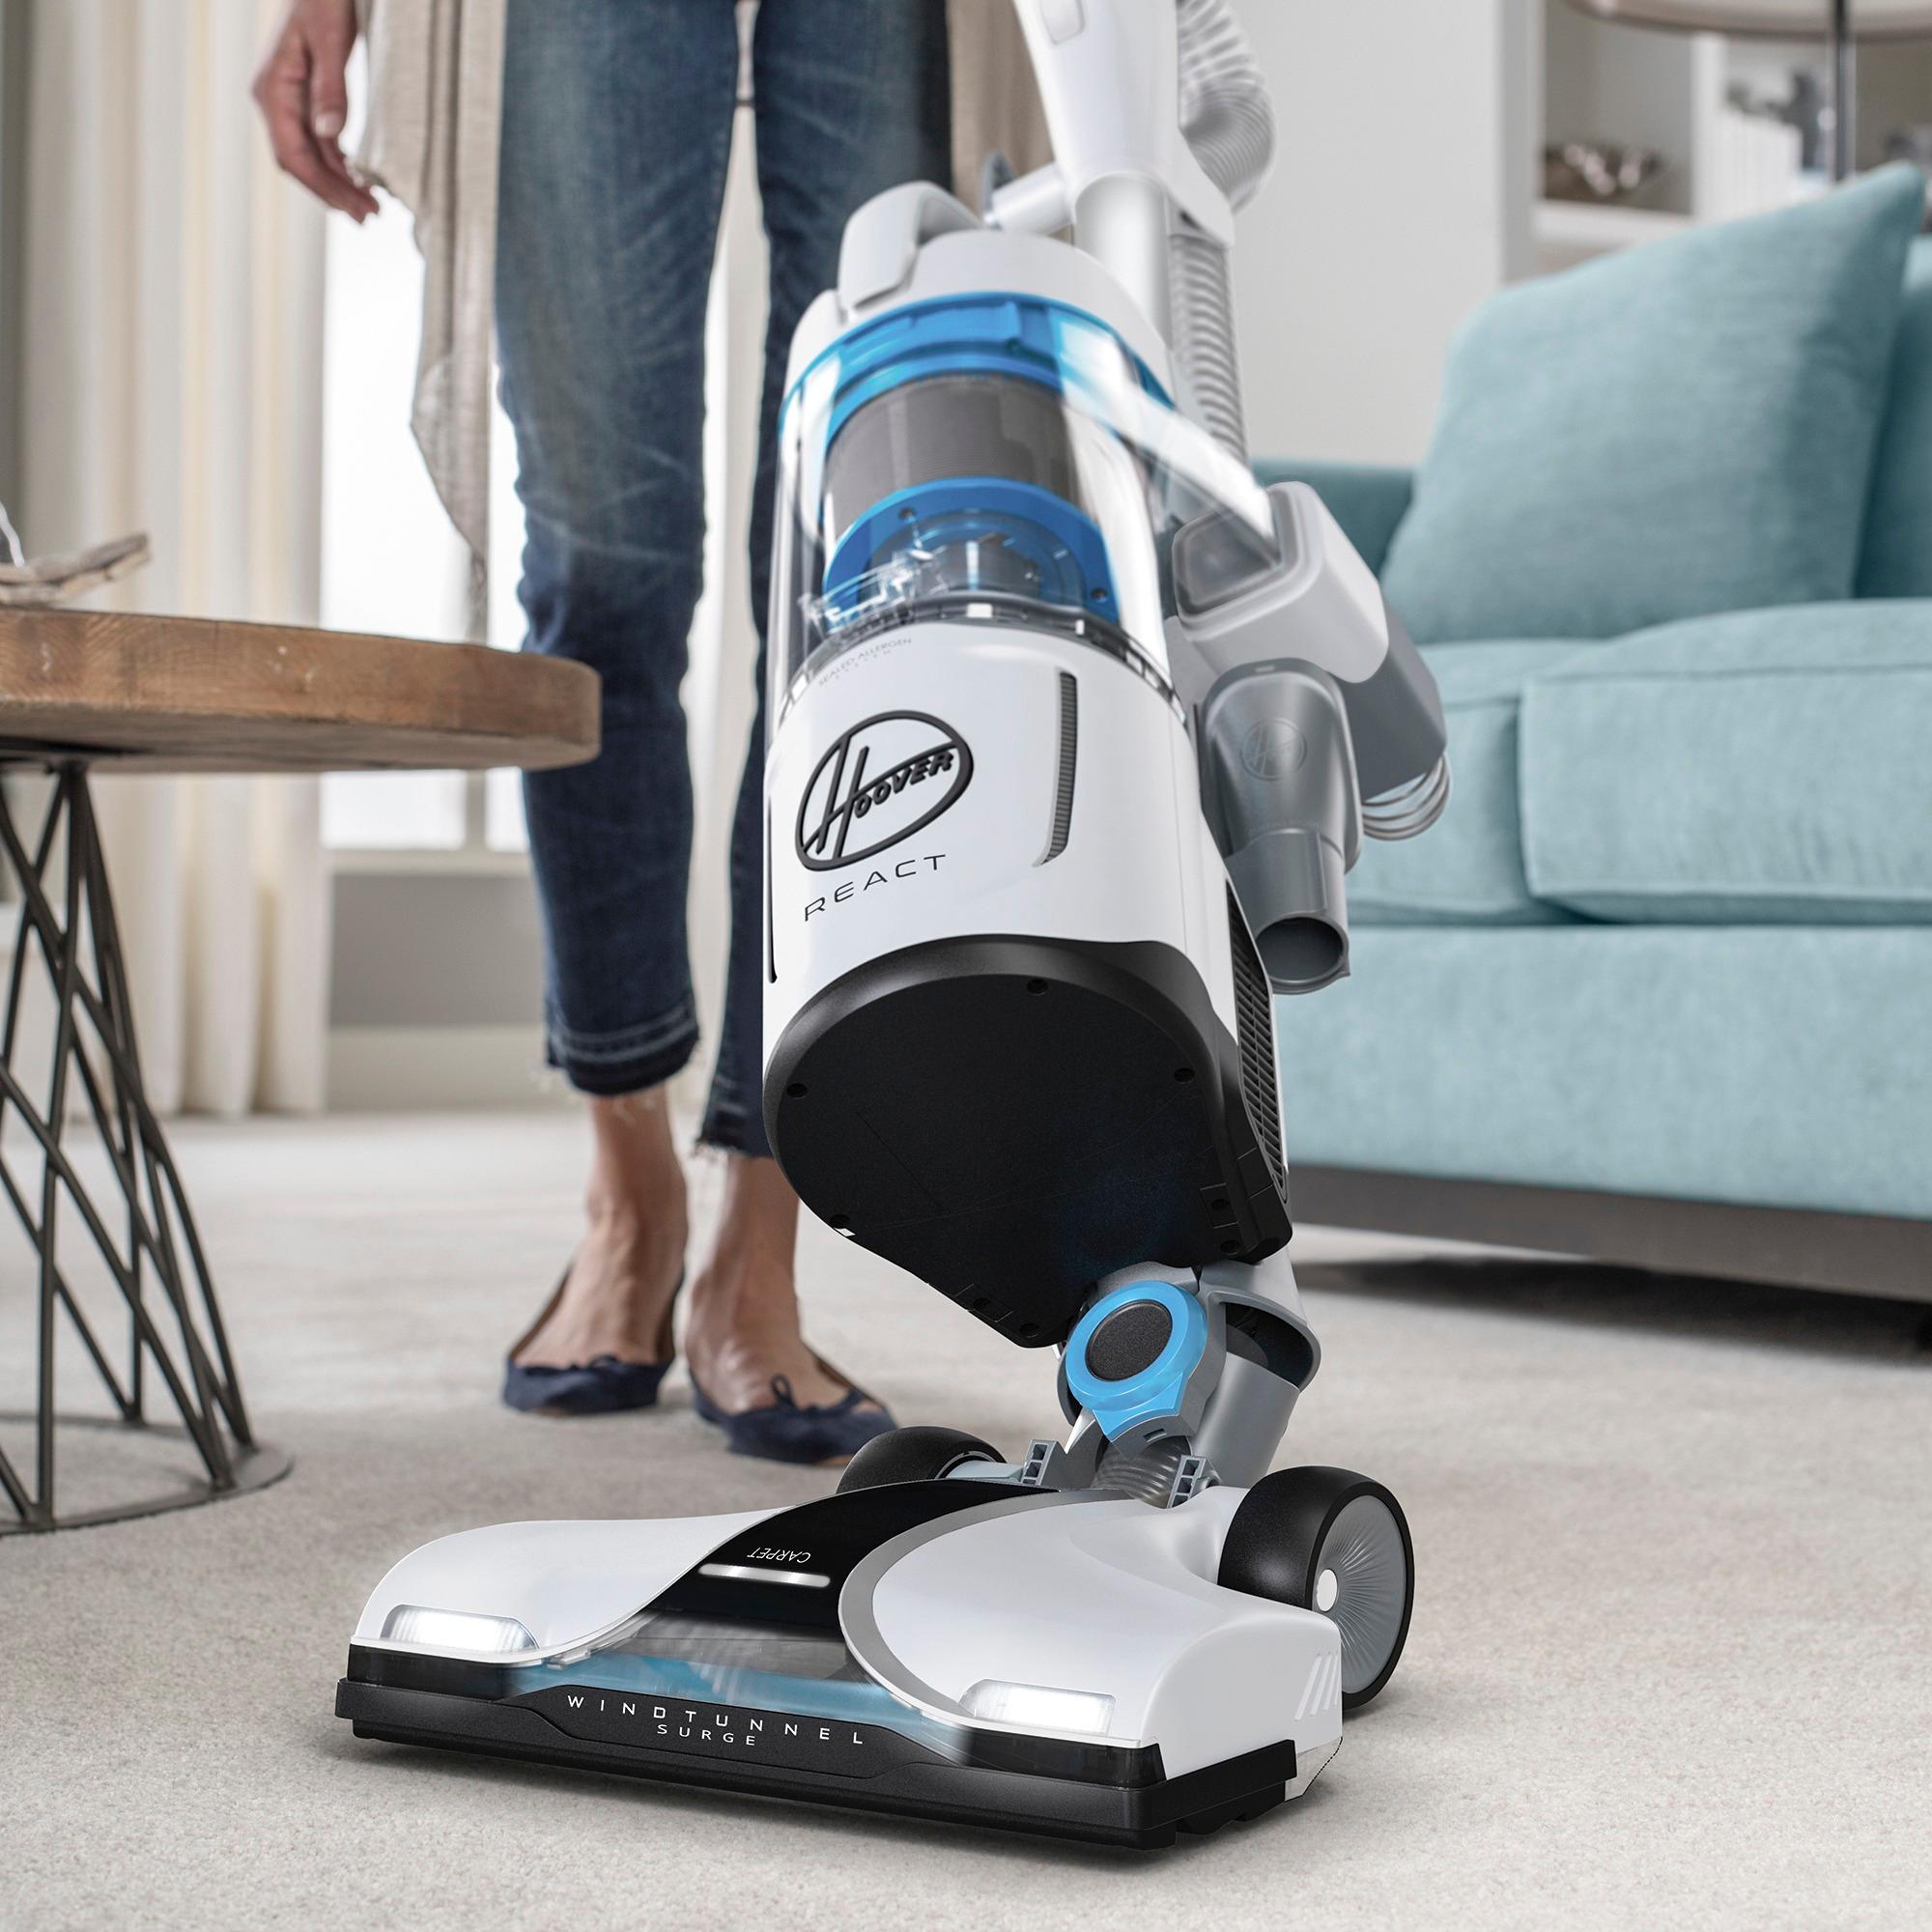 Hoover React Powered Reach Lite Bagless Upright Vacuum, UH73400 